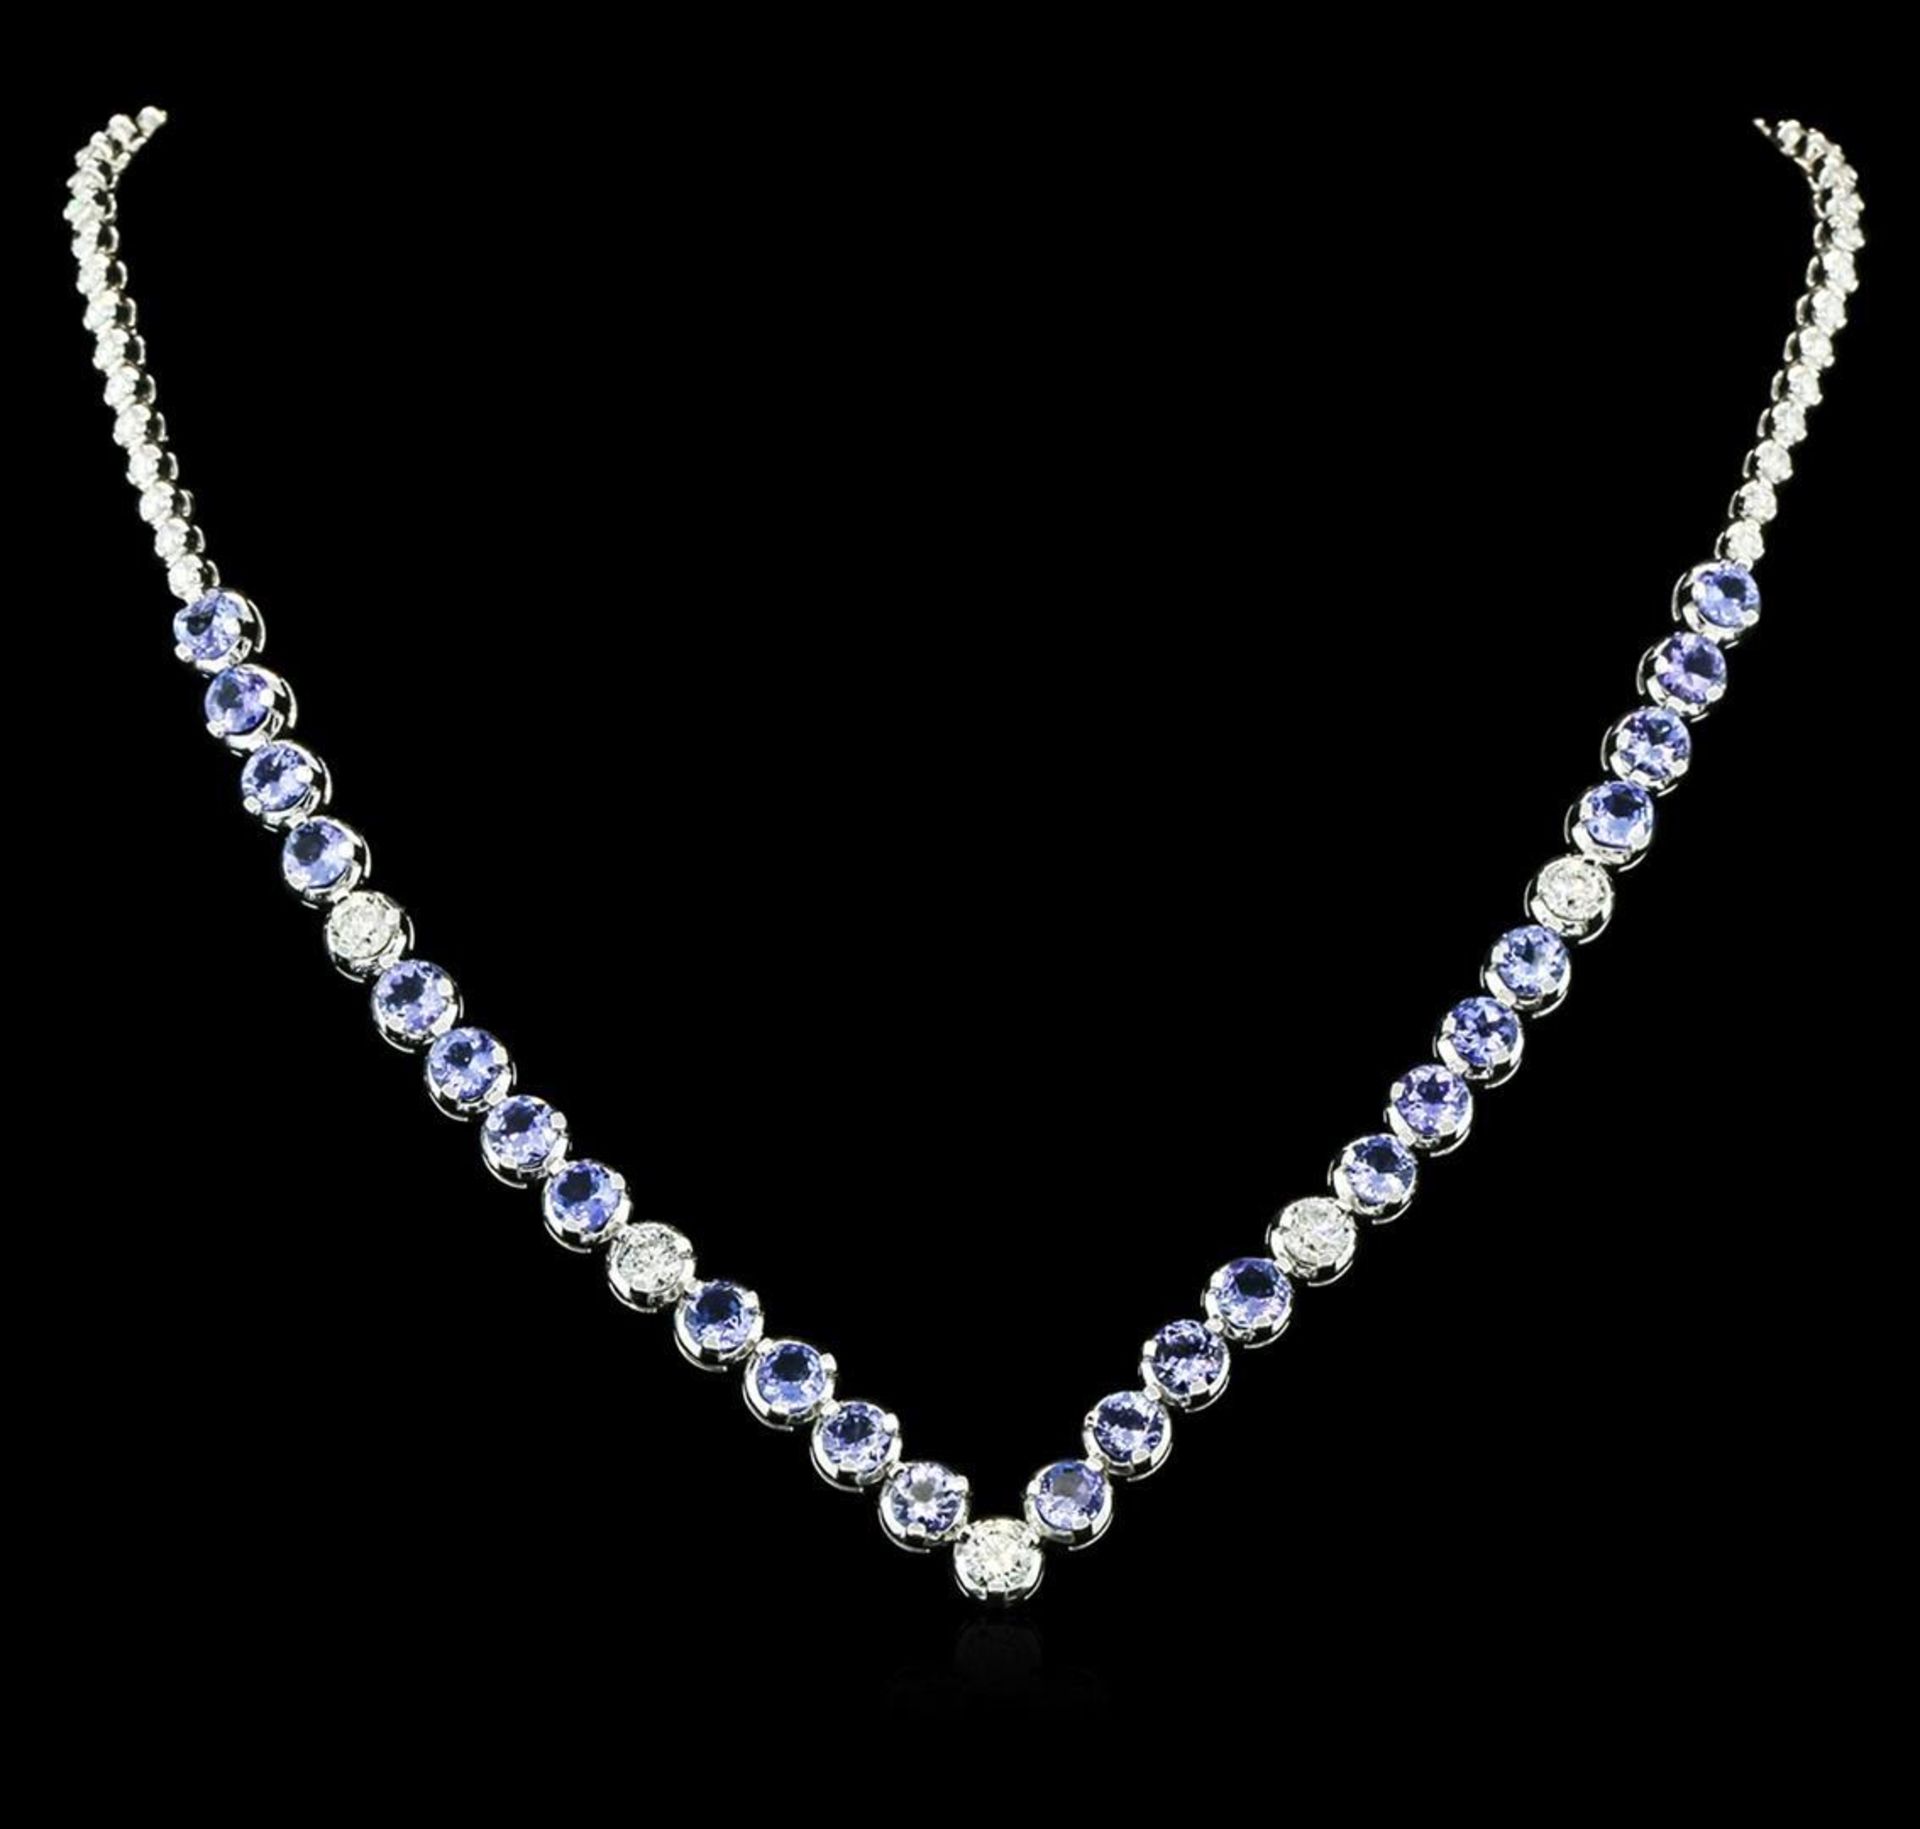 14KT White Gold 11.52 ctw Tanzanite and Diamond Necklace - Image 2 of 3